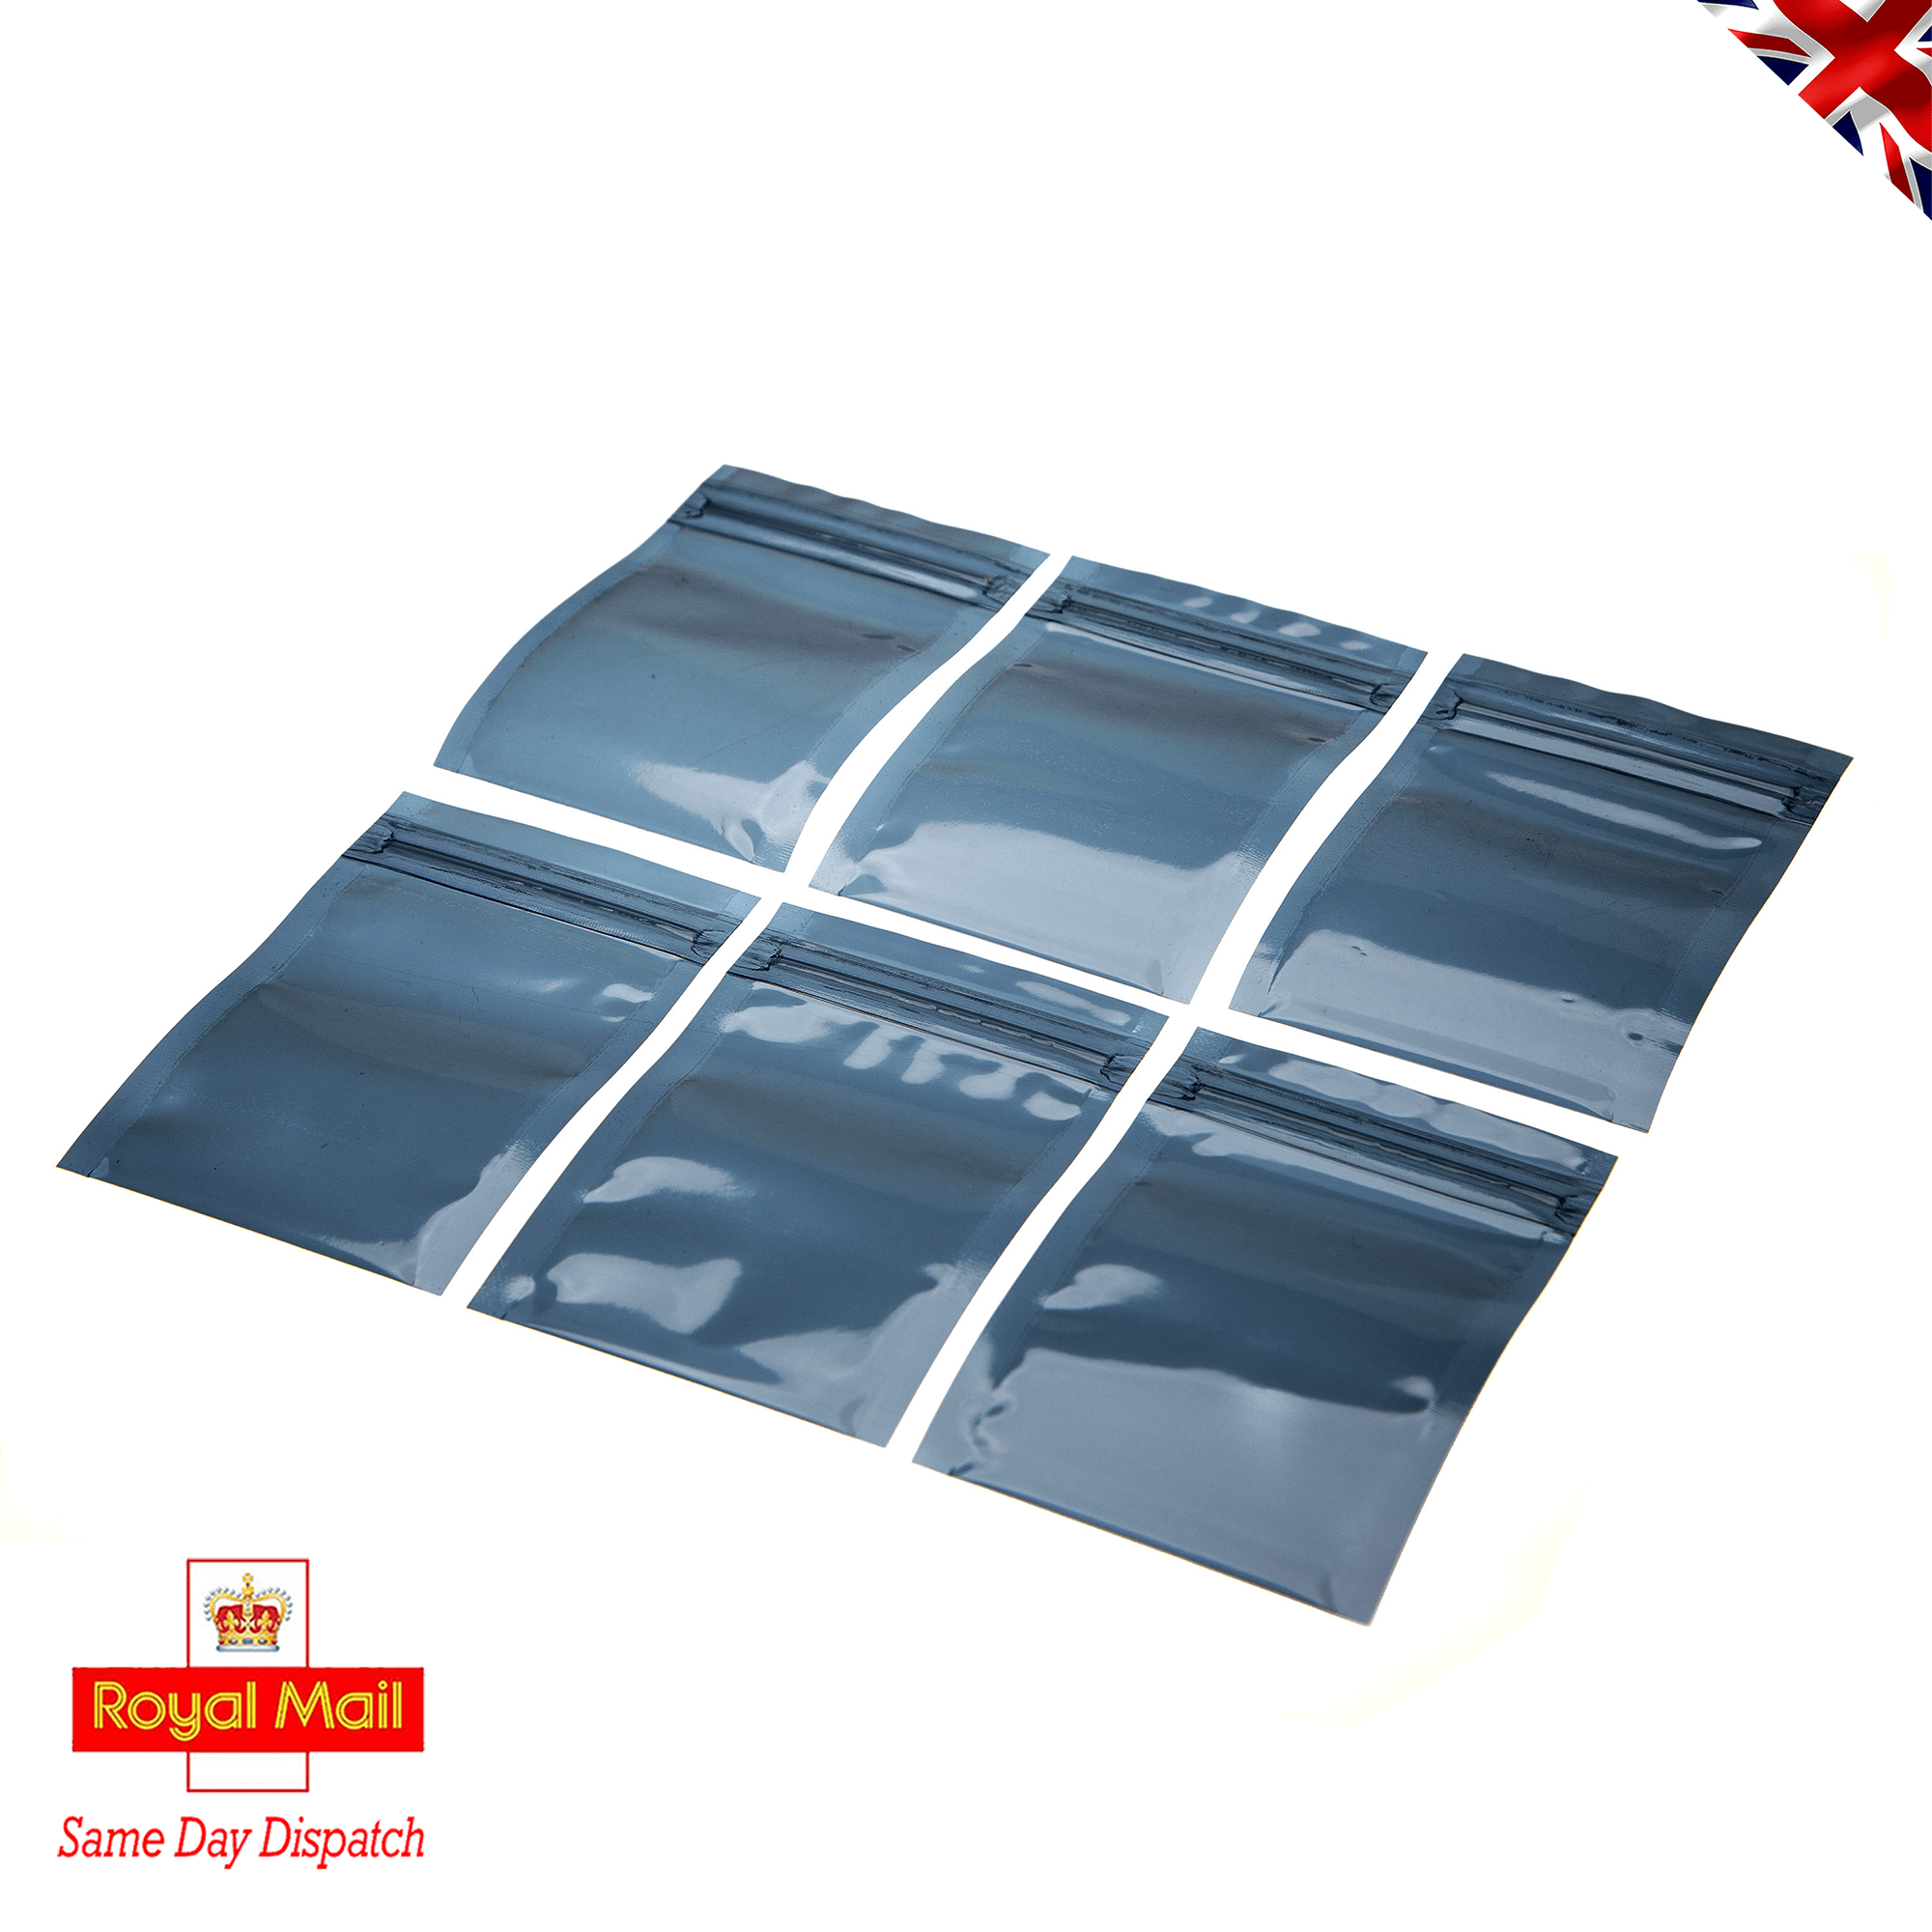 Click Seal Reusable Metallised Anti-Static Bags 70 mm x 100 mm Ideal for temporary safe storage, shipping. Protects delicate ESD Devices from Static Discharge Damage and Moisture. Flat Pouch, Metallised, Grey, 50% Transparent, Click Seal to Shortest Side. Bags can be Heat Sealed if Required for Extra Security